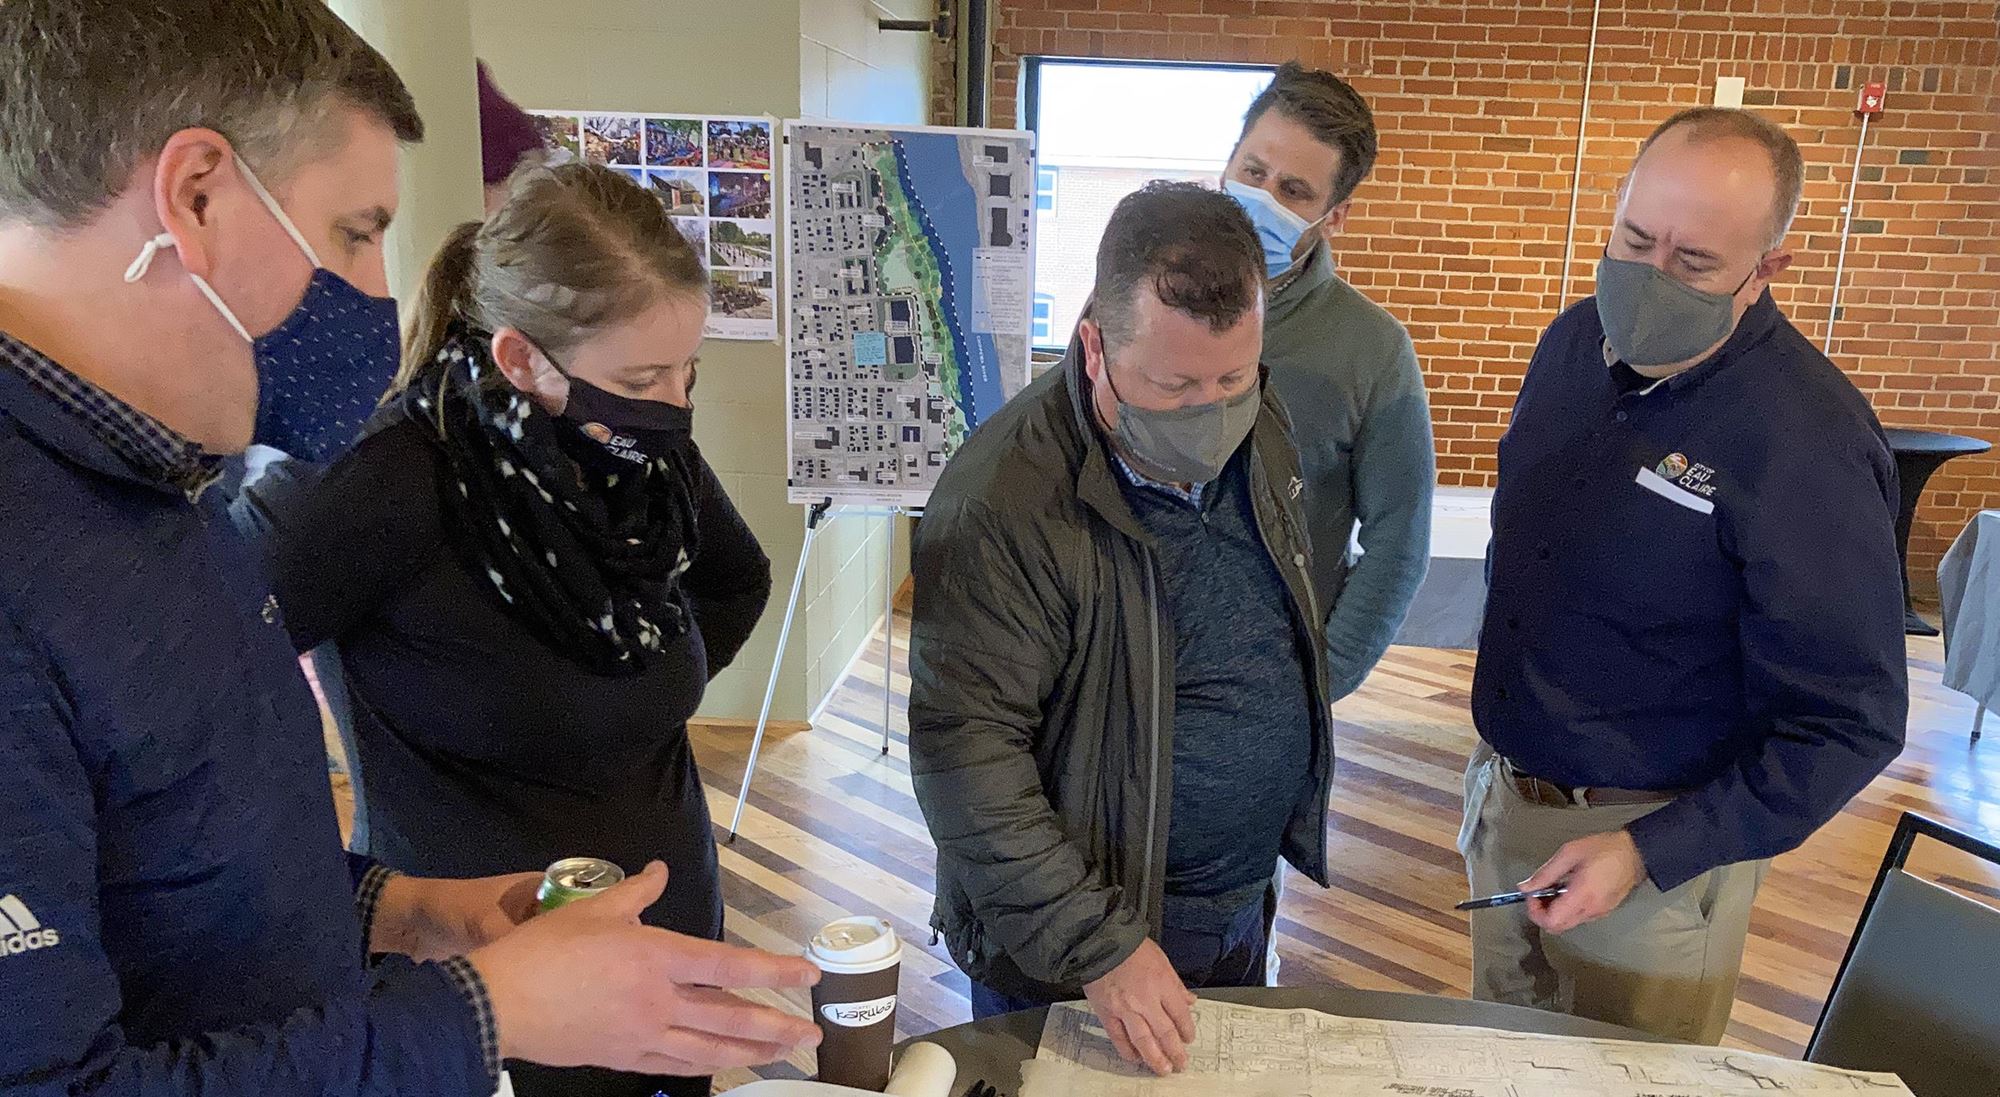 Designs underway for Cannery District Parks